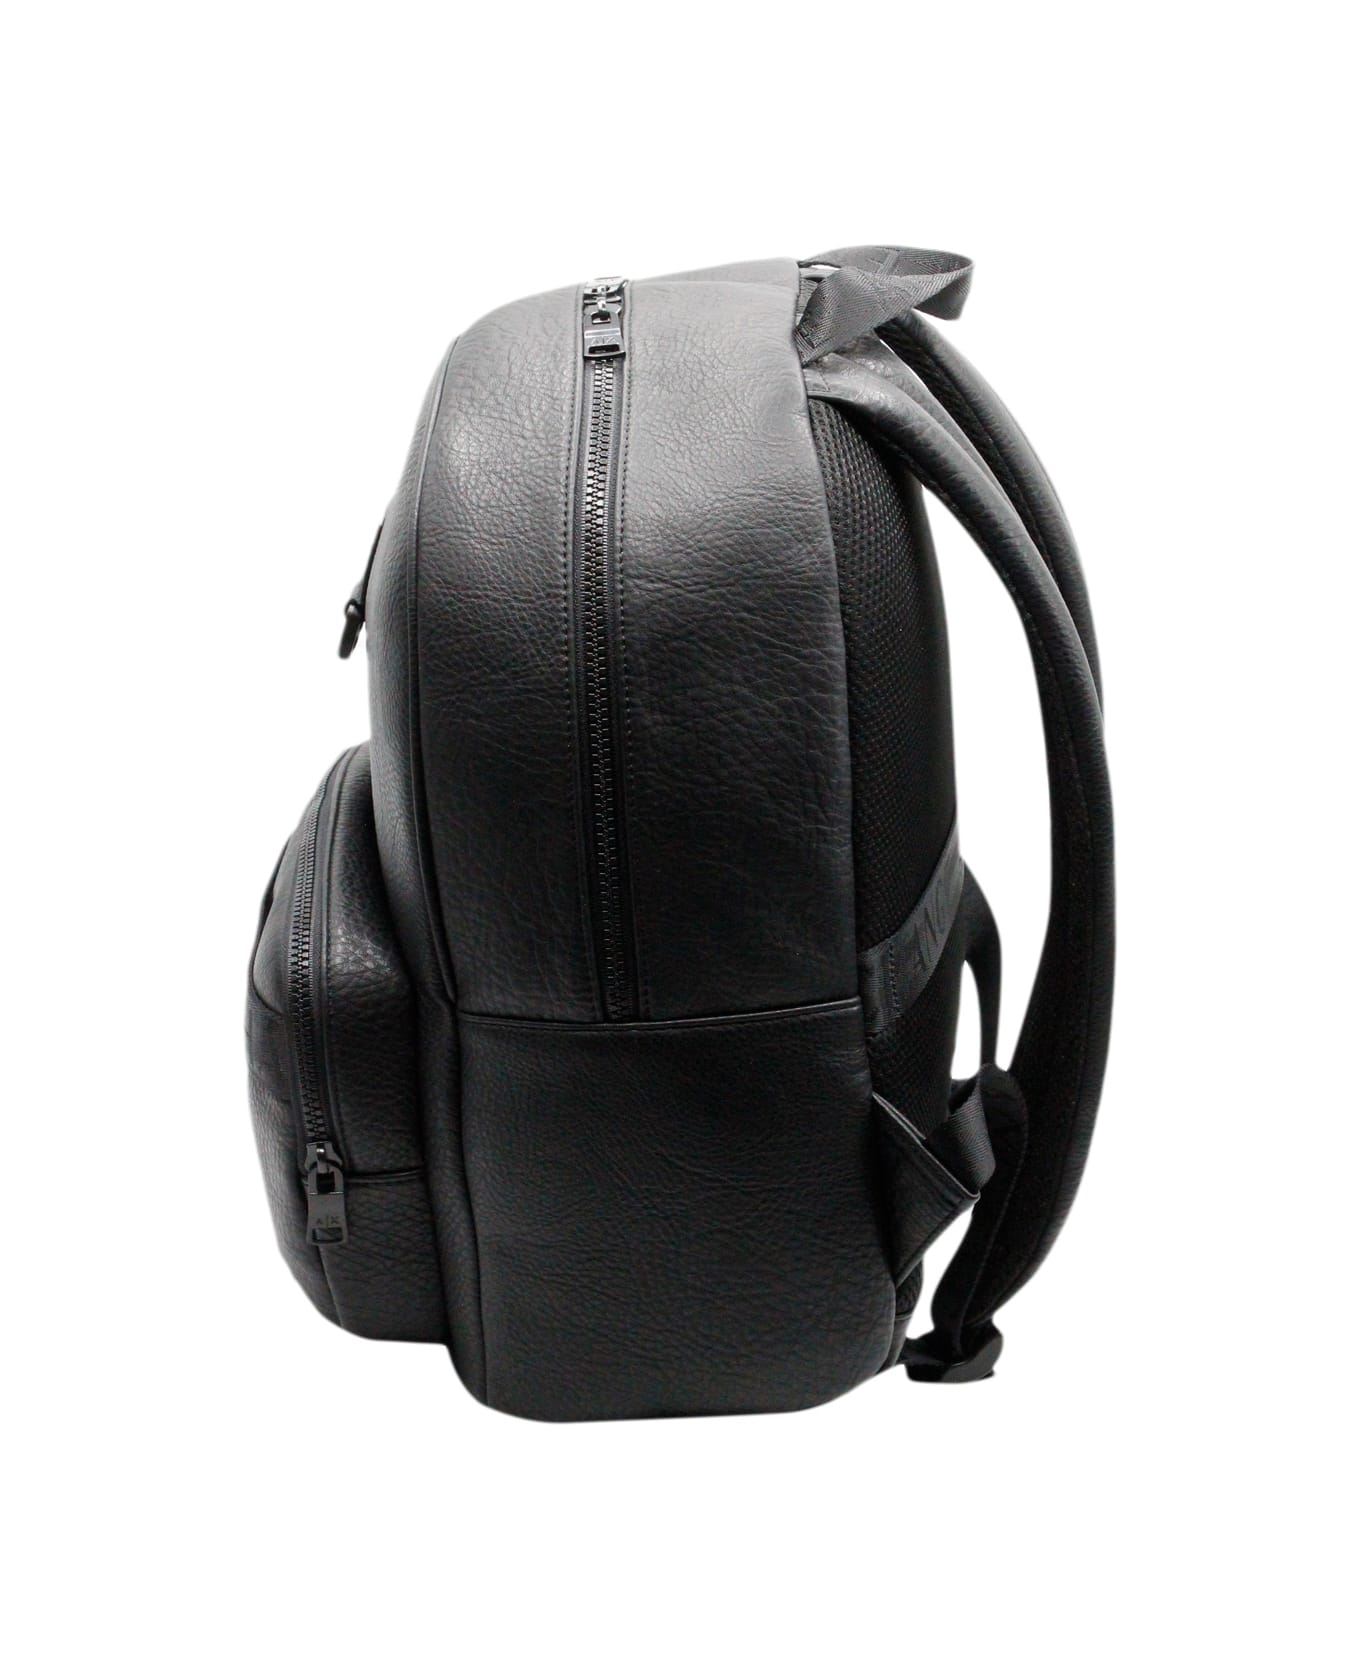 Armani Collezioni Backpack In Very Soft Soft Grain Eco-leather With Logo Written On The Front. Adjustable Shoulder Straps. Measures 38x32x12 Cm - Black